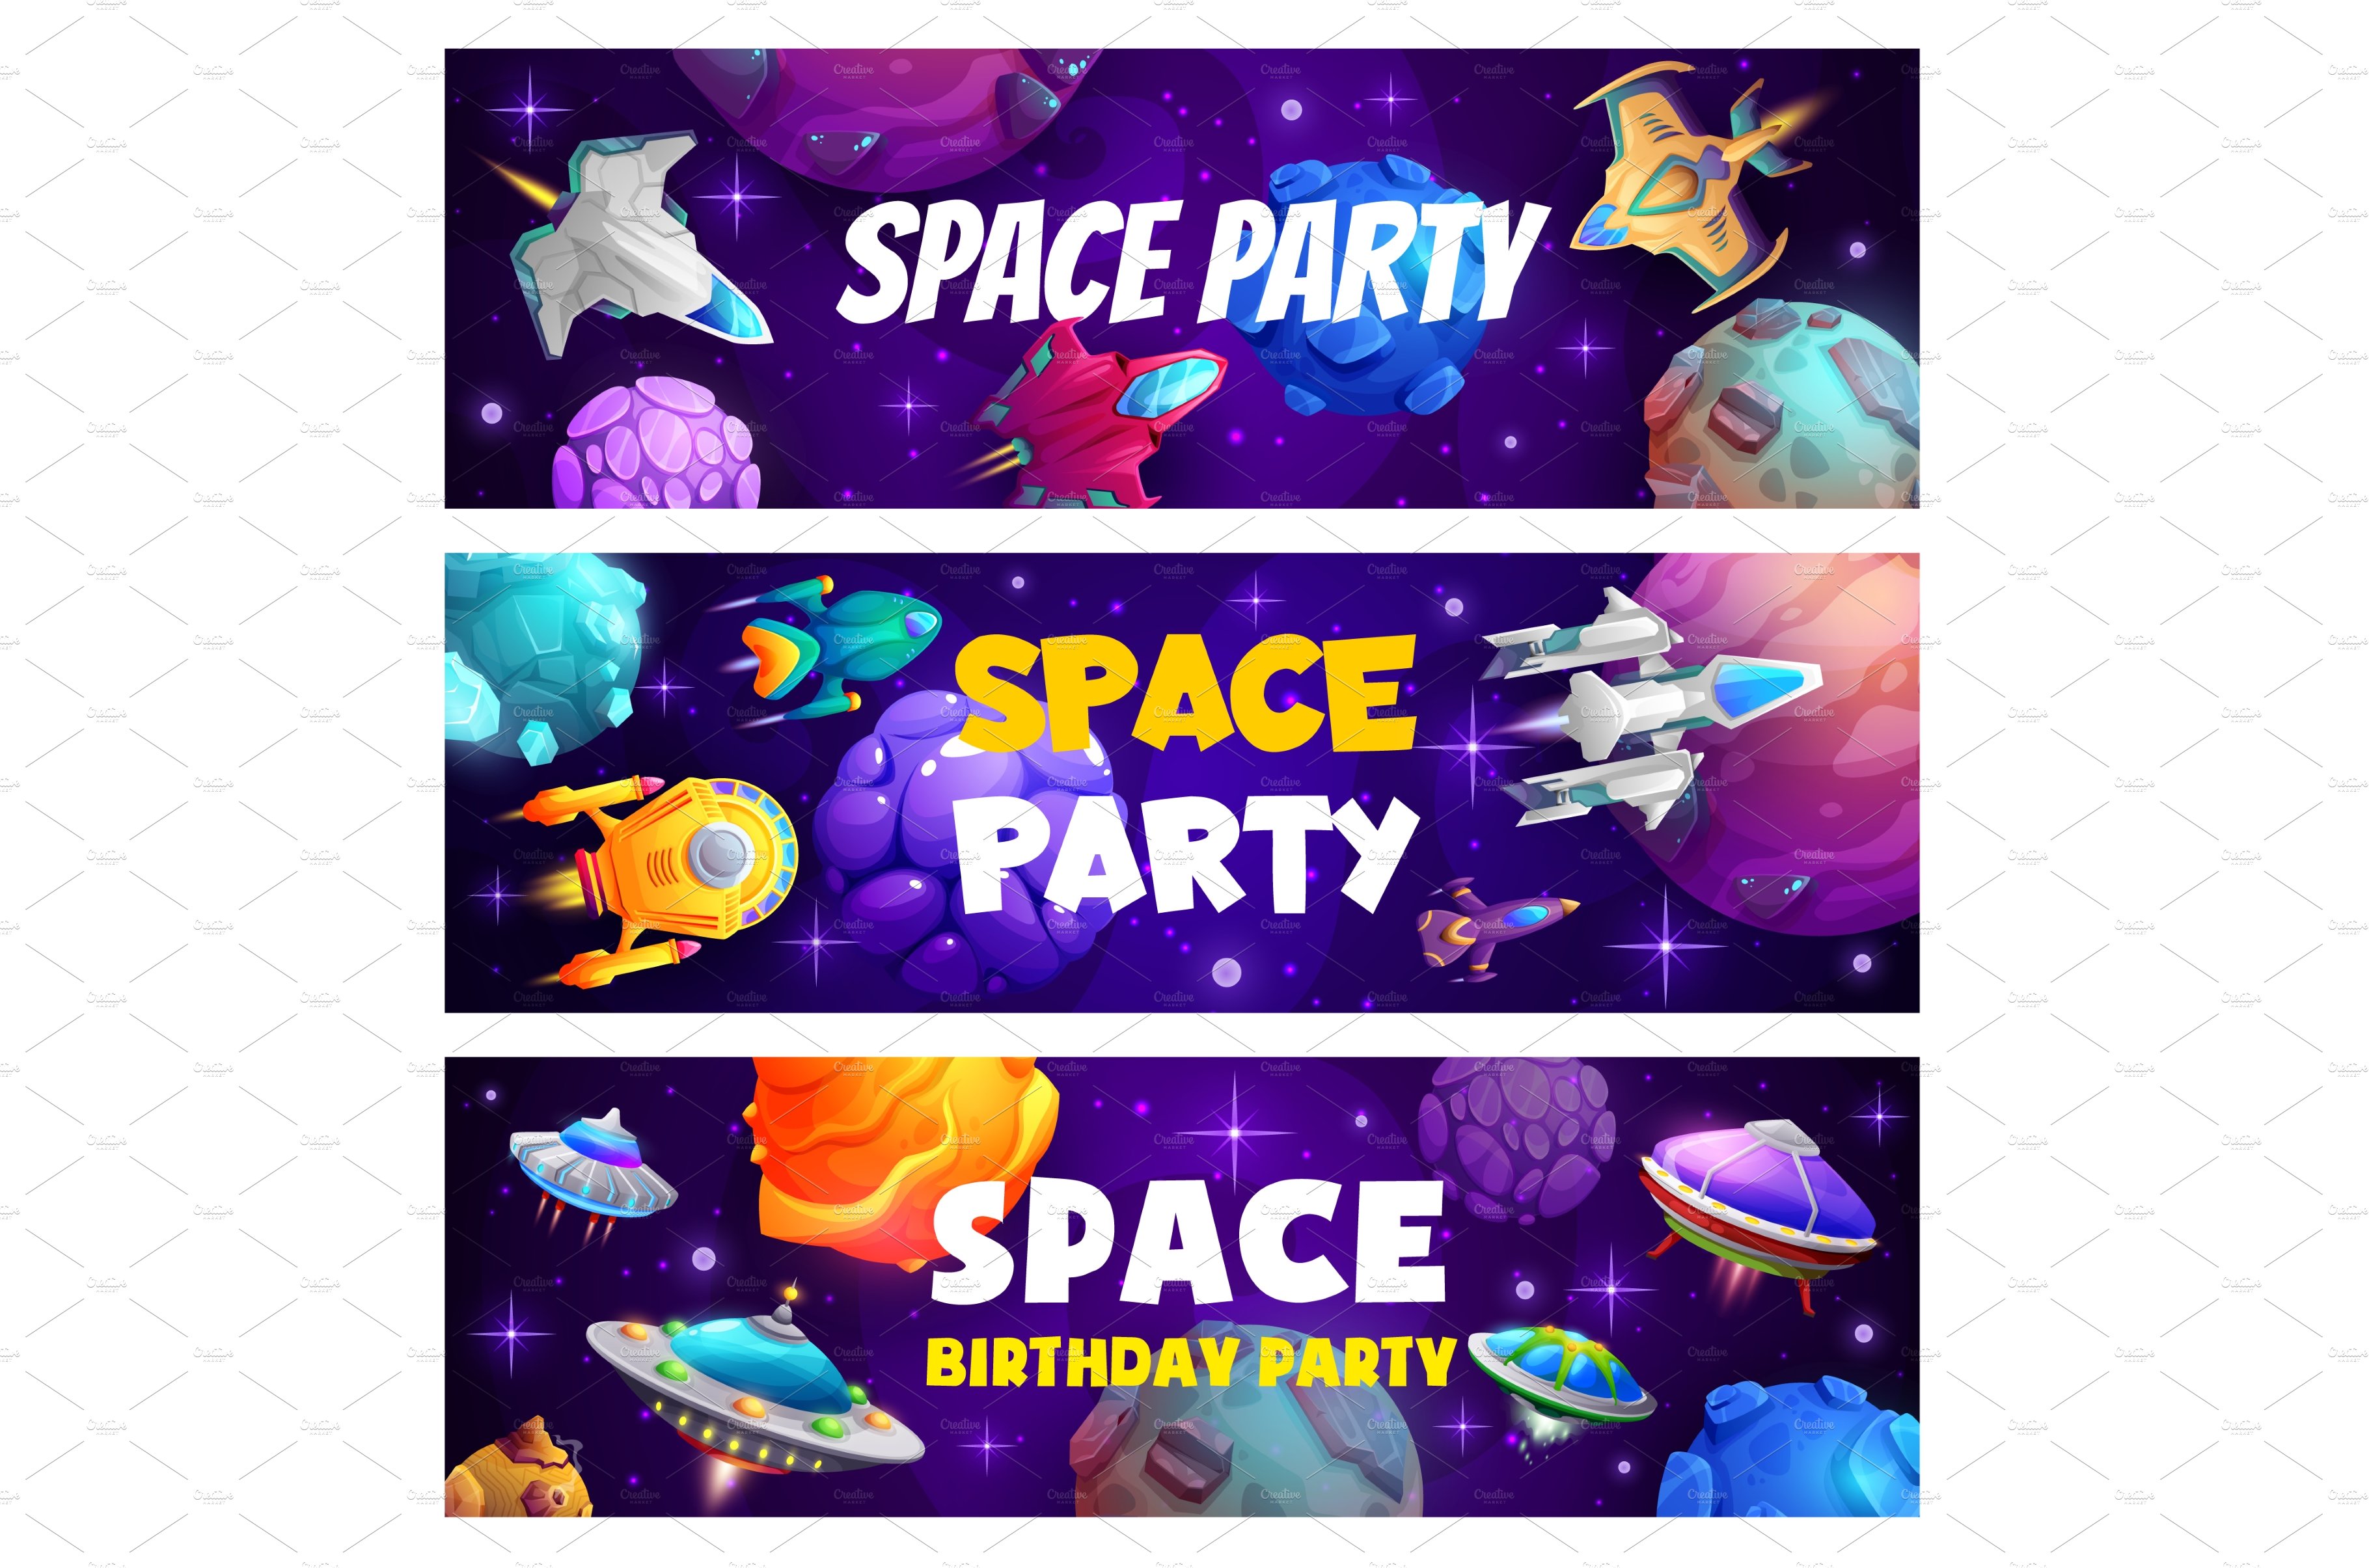 Space party, spacecrafts, rockets cover image.